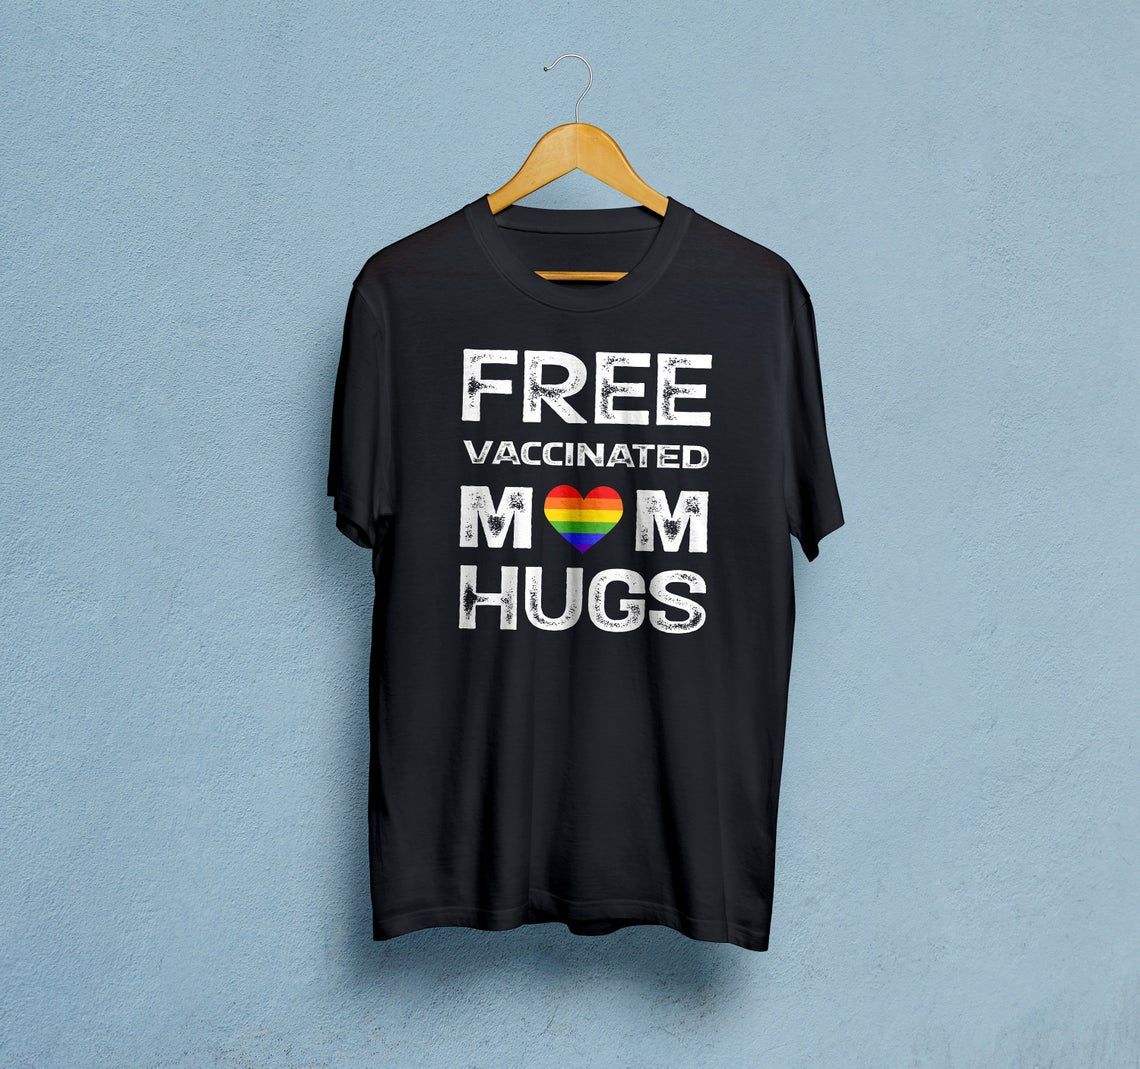 Free Vaccinated Mom Hugs Shirt Style: Unisex T-shirt, Color: Black